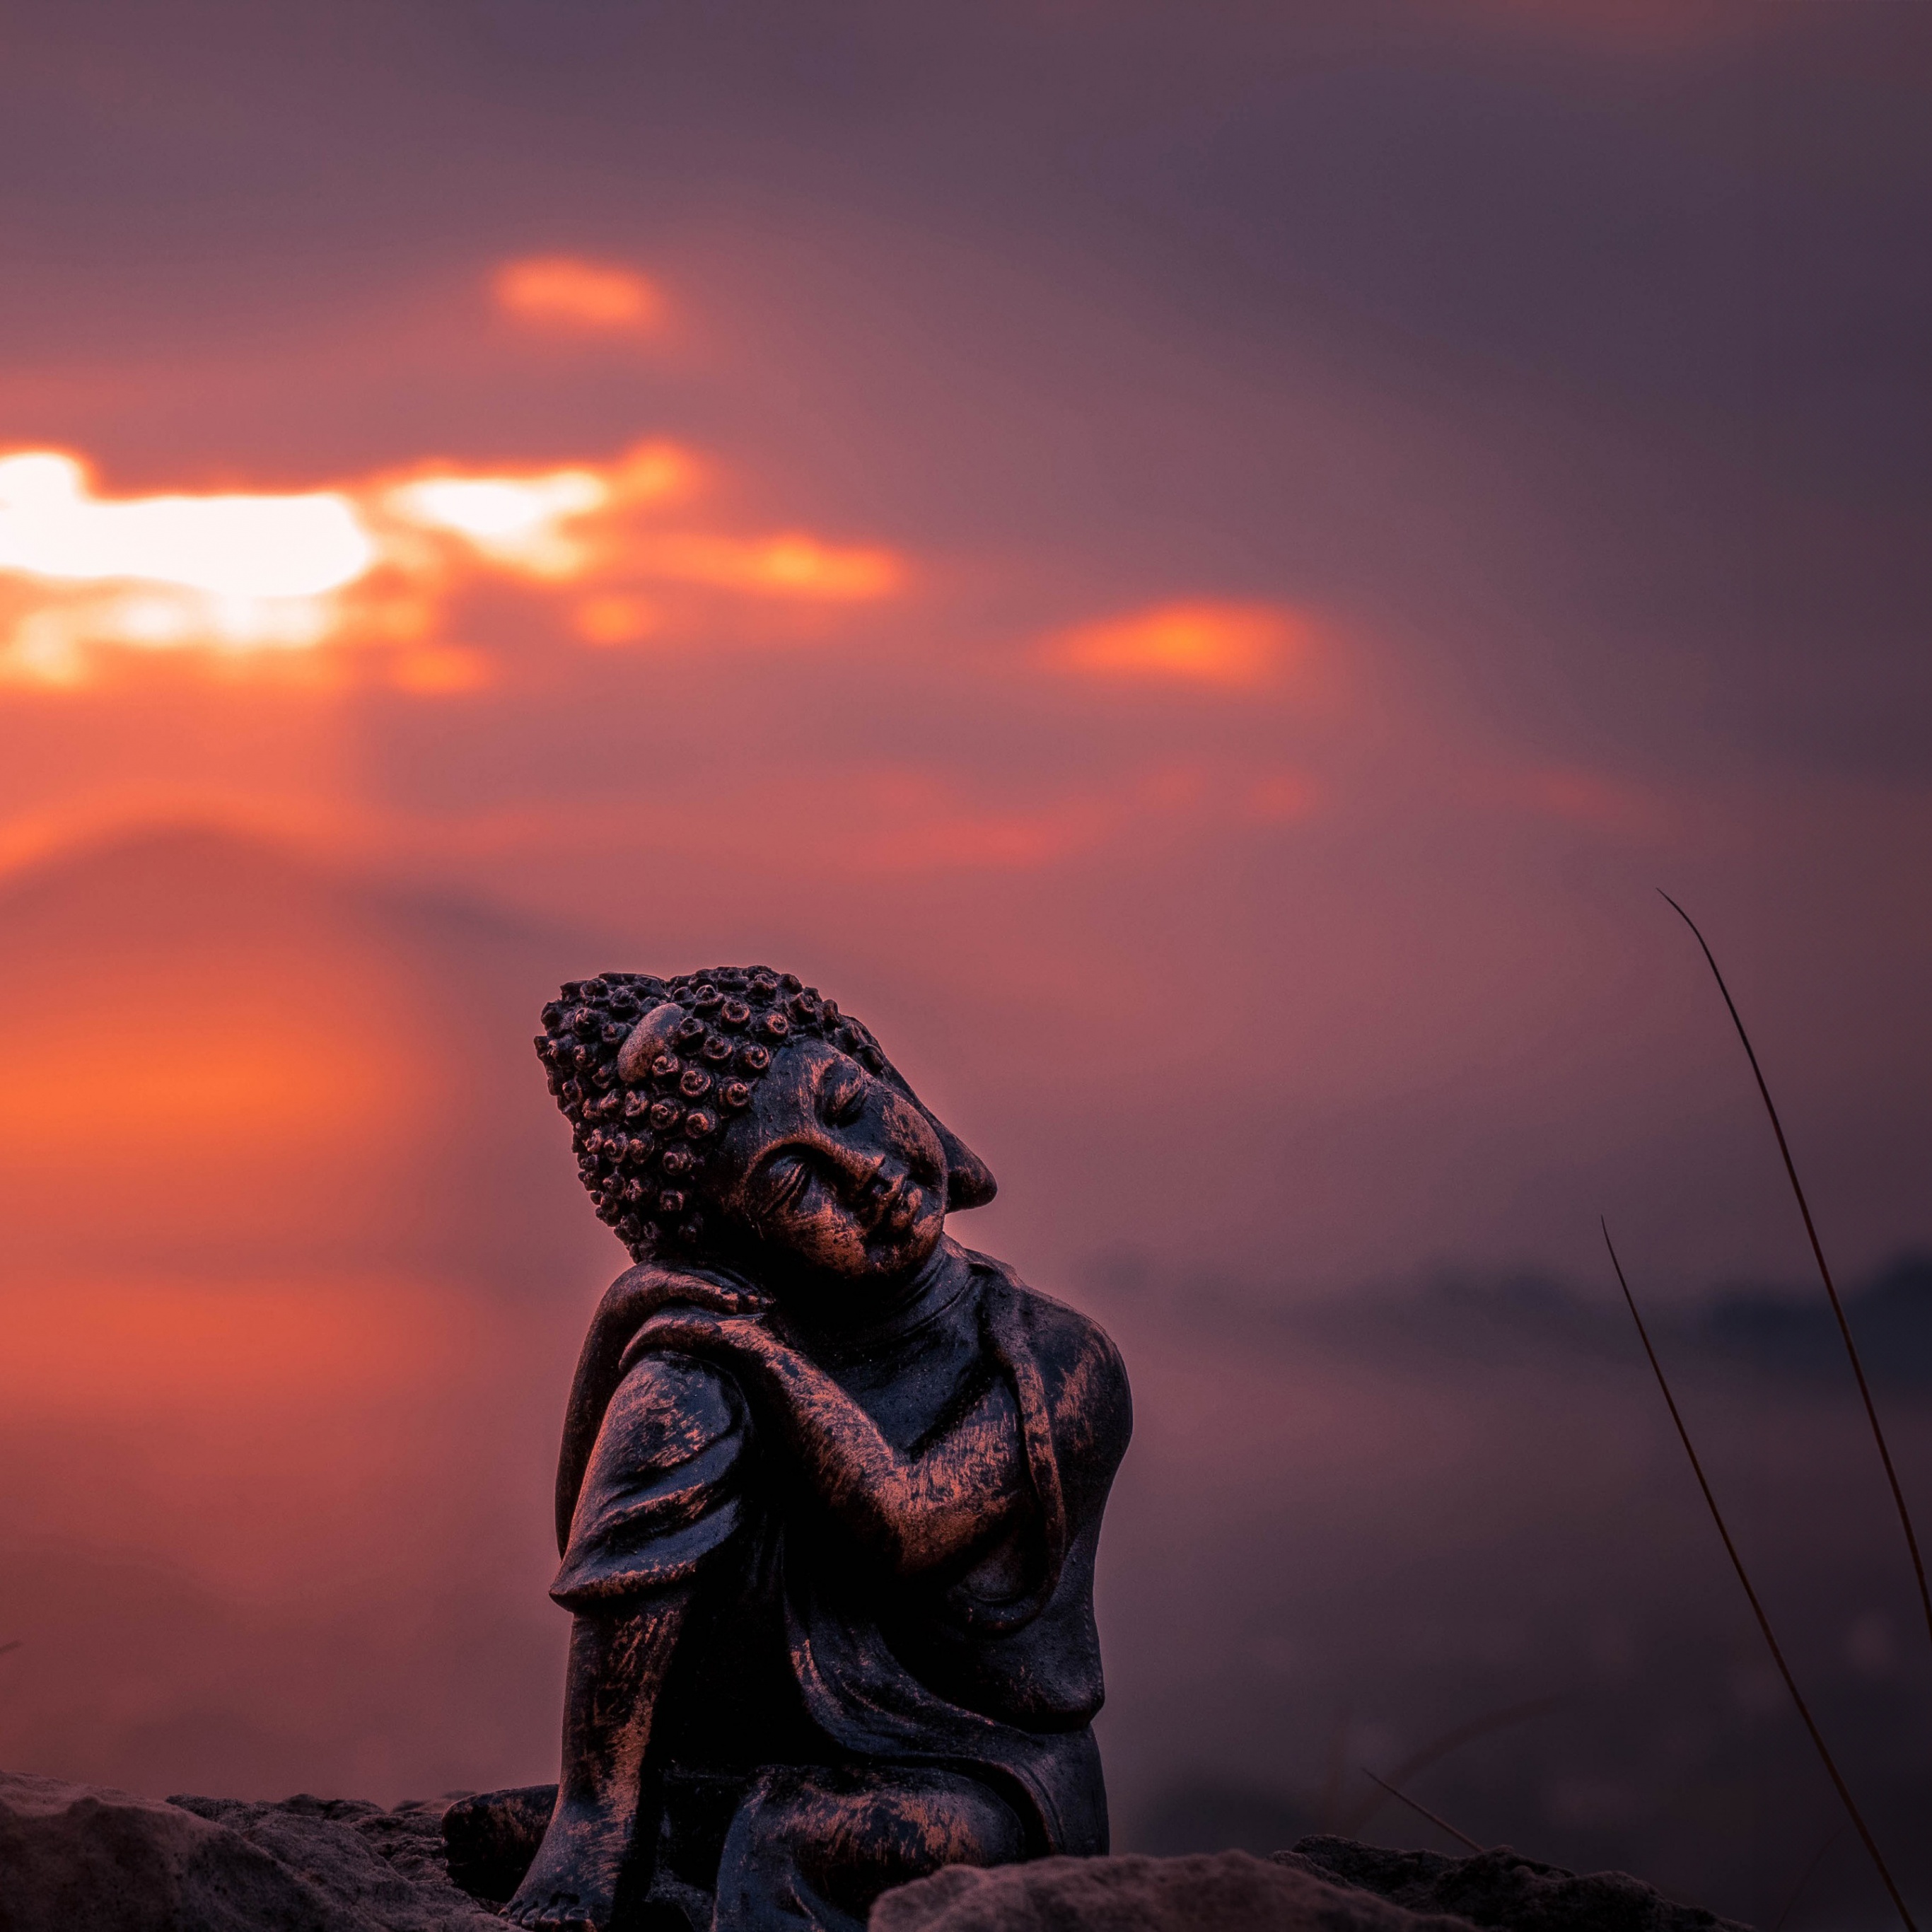 Lord Buddha Wallpaper 4K, Statue, Sunset, Photography/Search Results, #2906